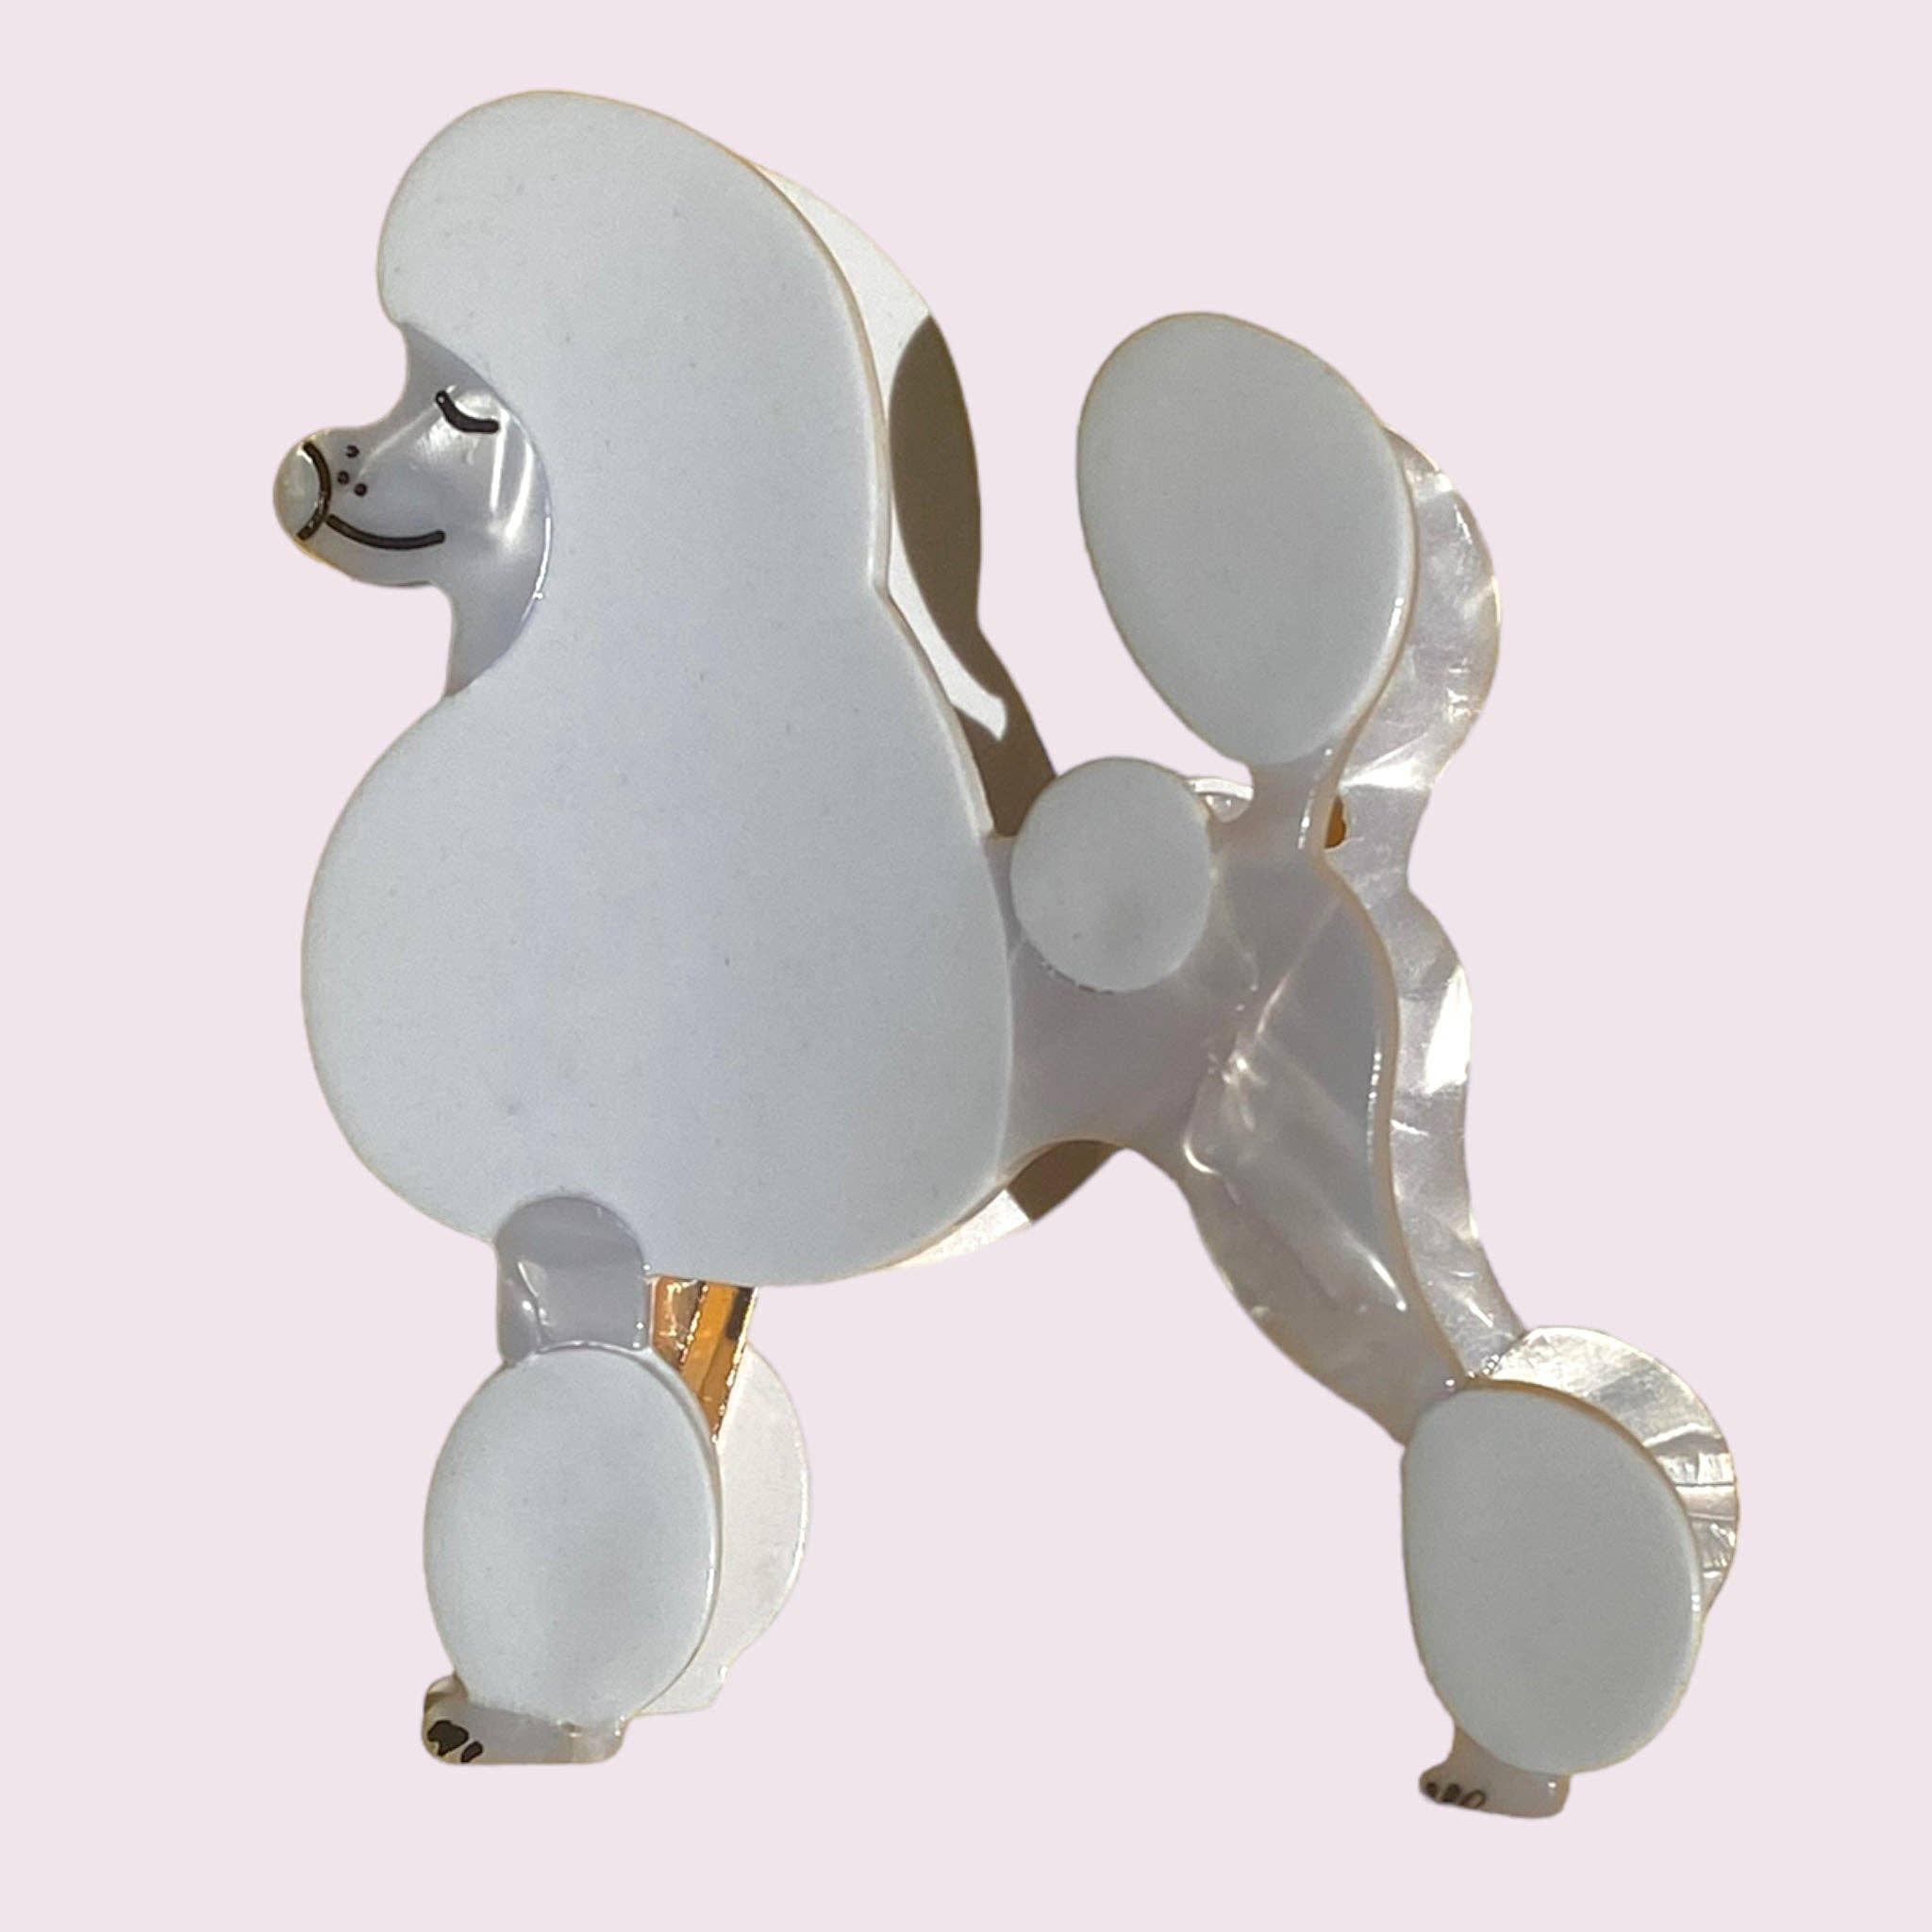 cutandcropped - Poodle Dog Hair Clip